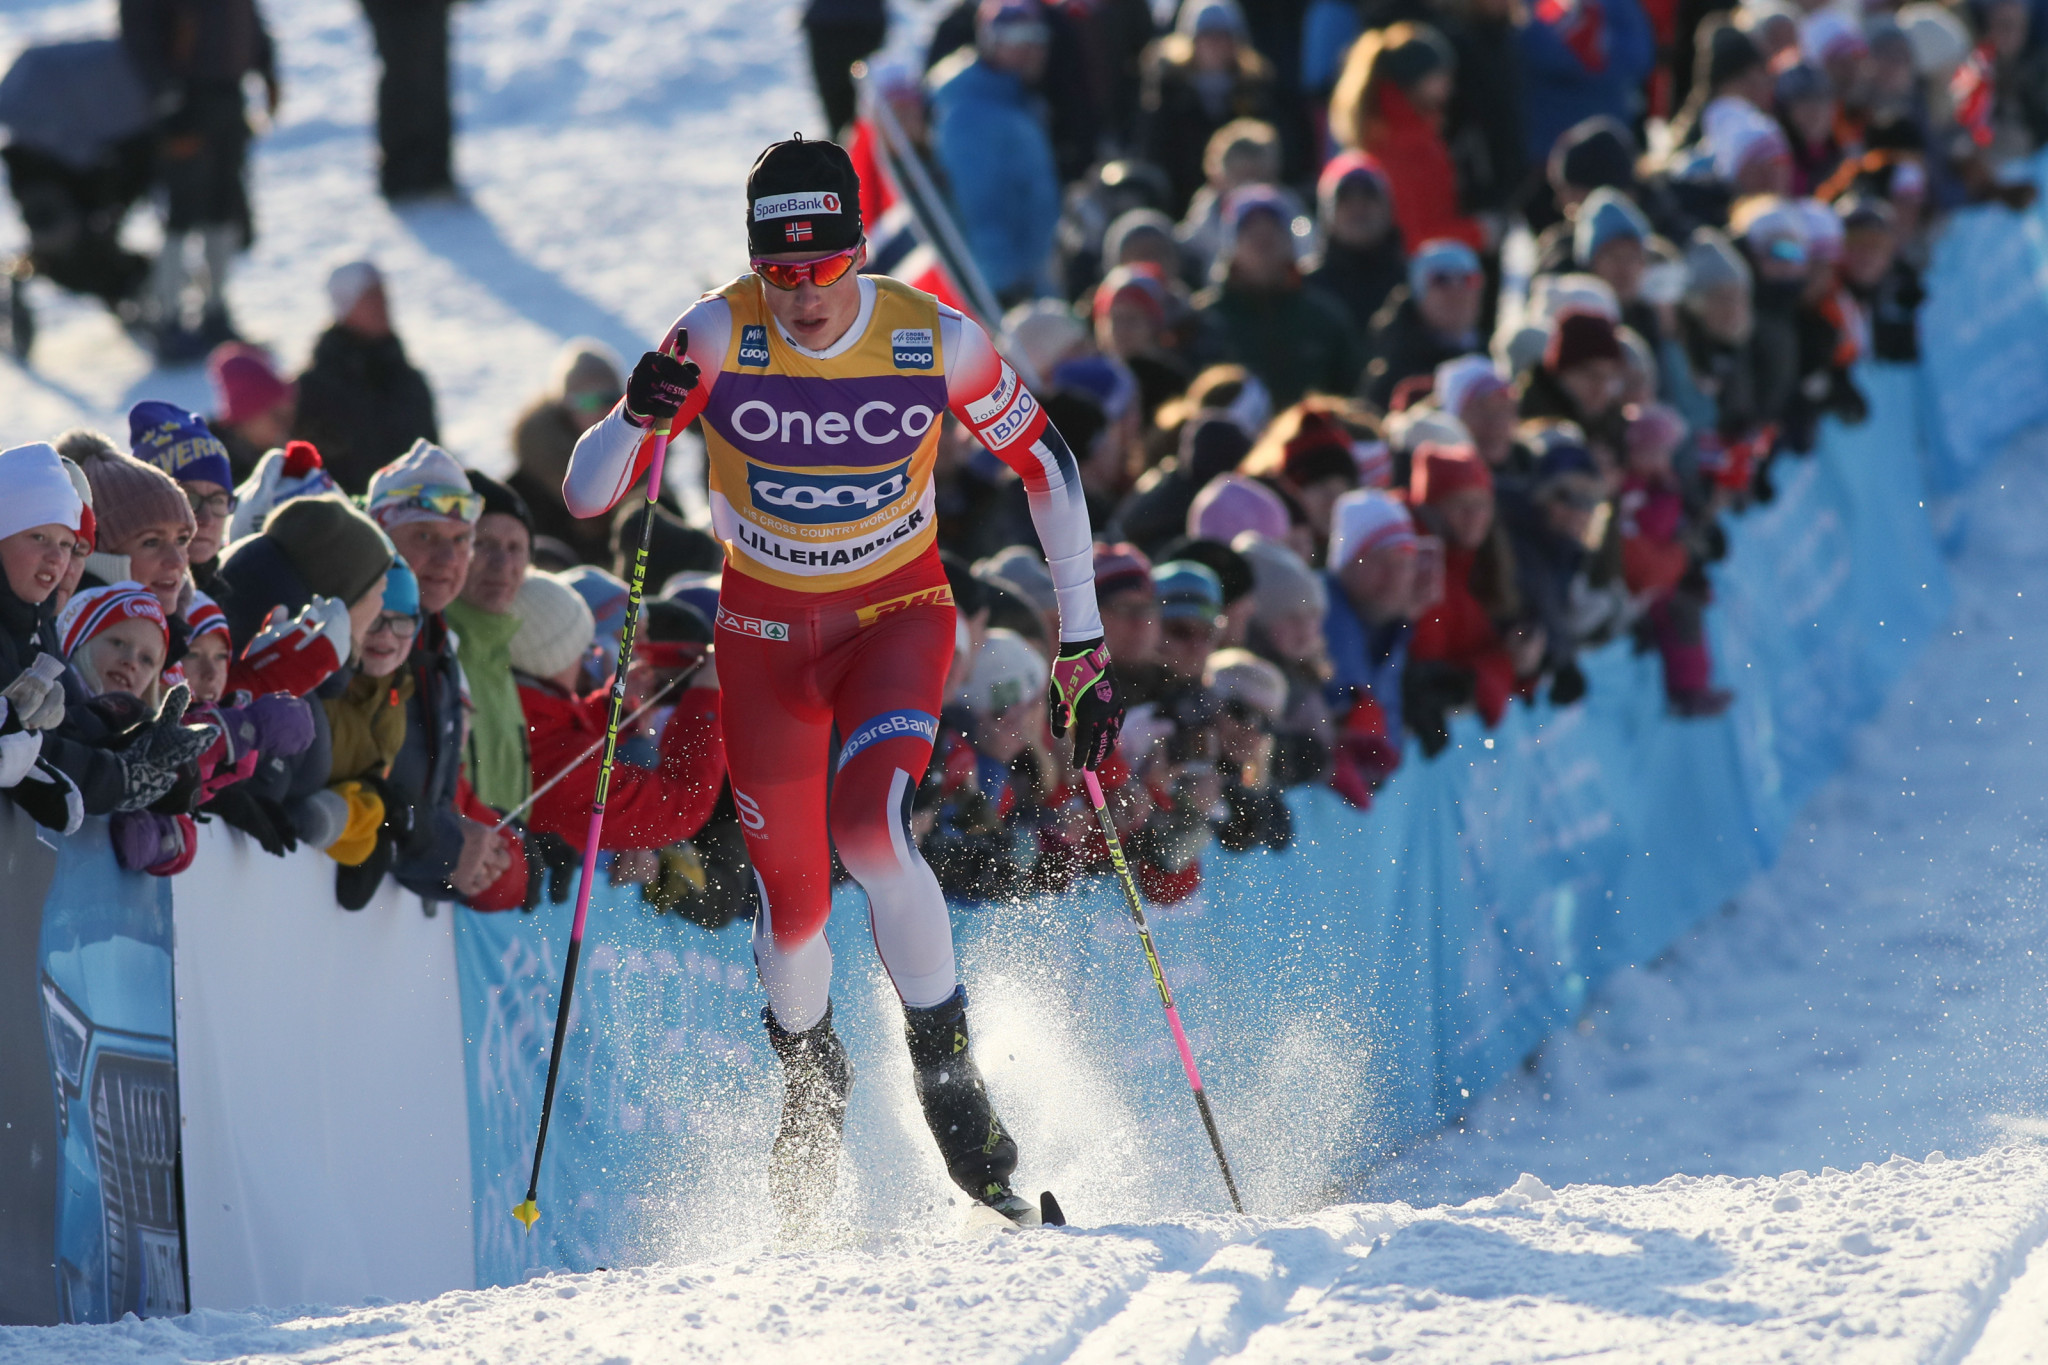 Norway's Johannes Høsflot Klæbo is the man to beat at the FIS Cross-Country World Cup in Planica ©Getty Images